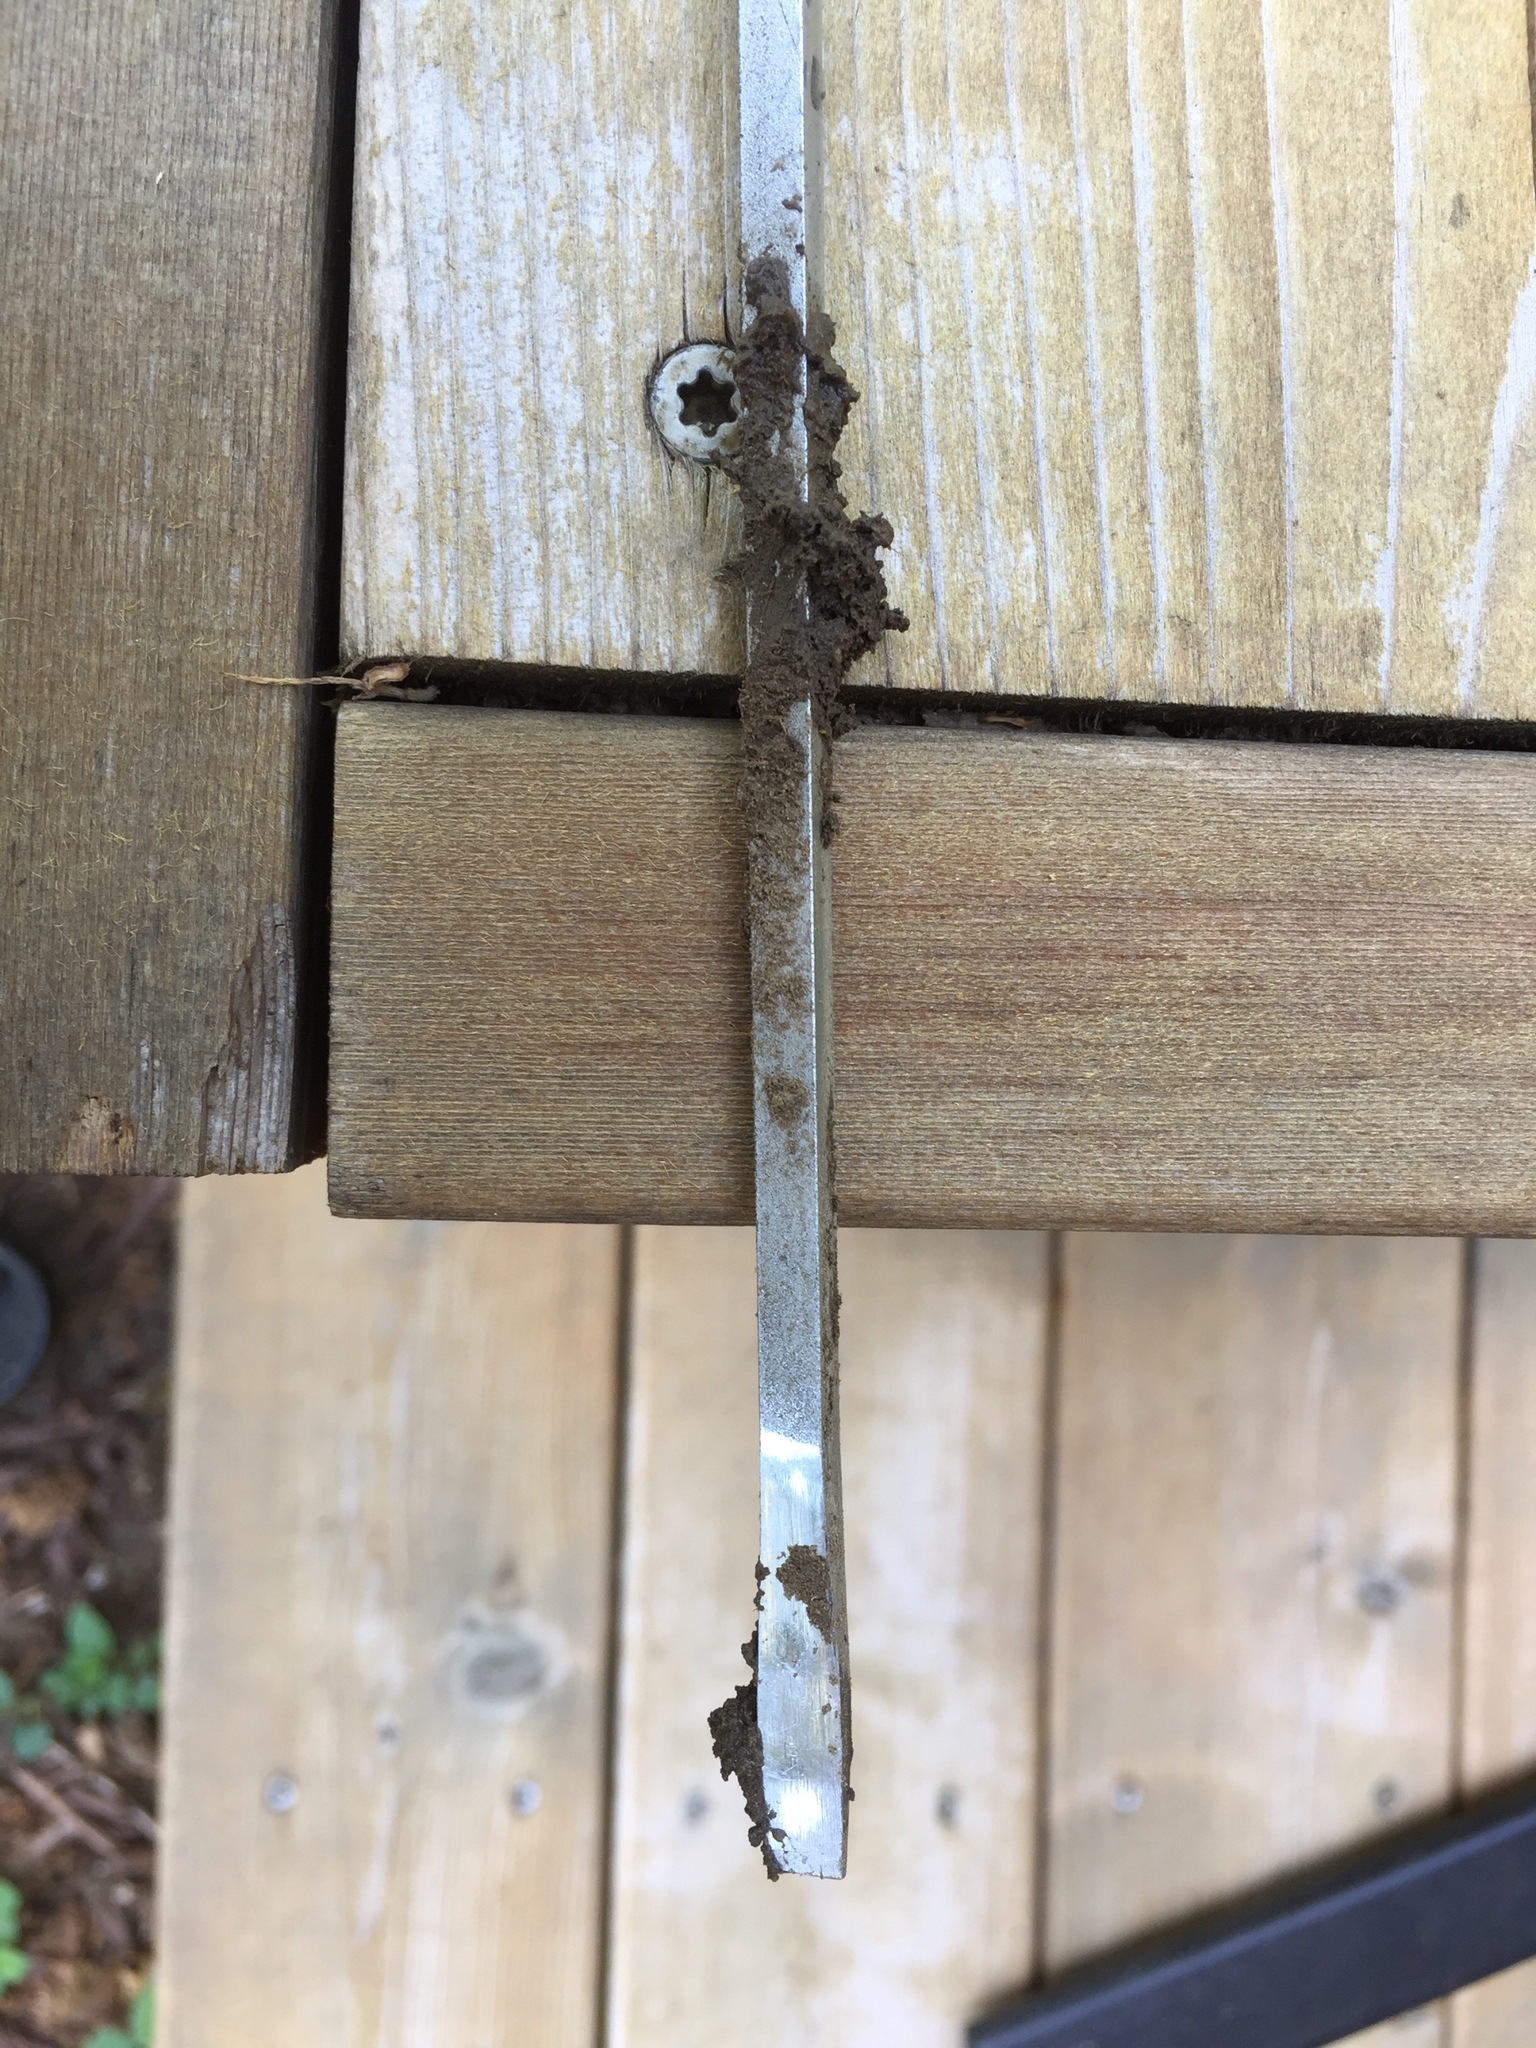 Damp soil clings to a flat head screwdriver used to test soil moisture